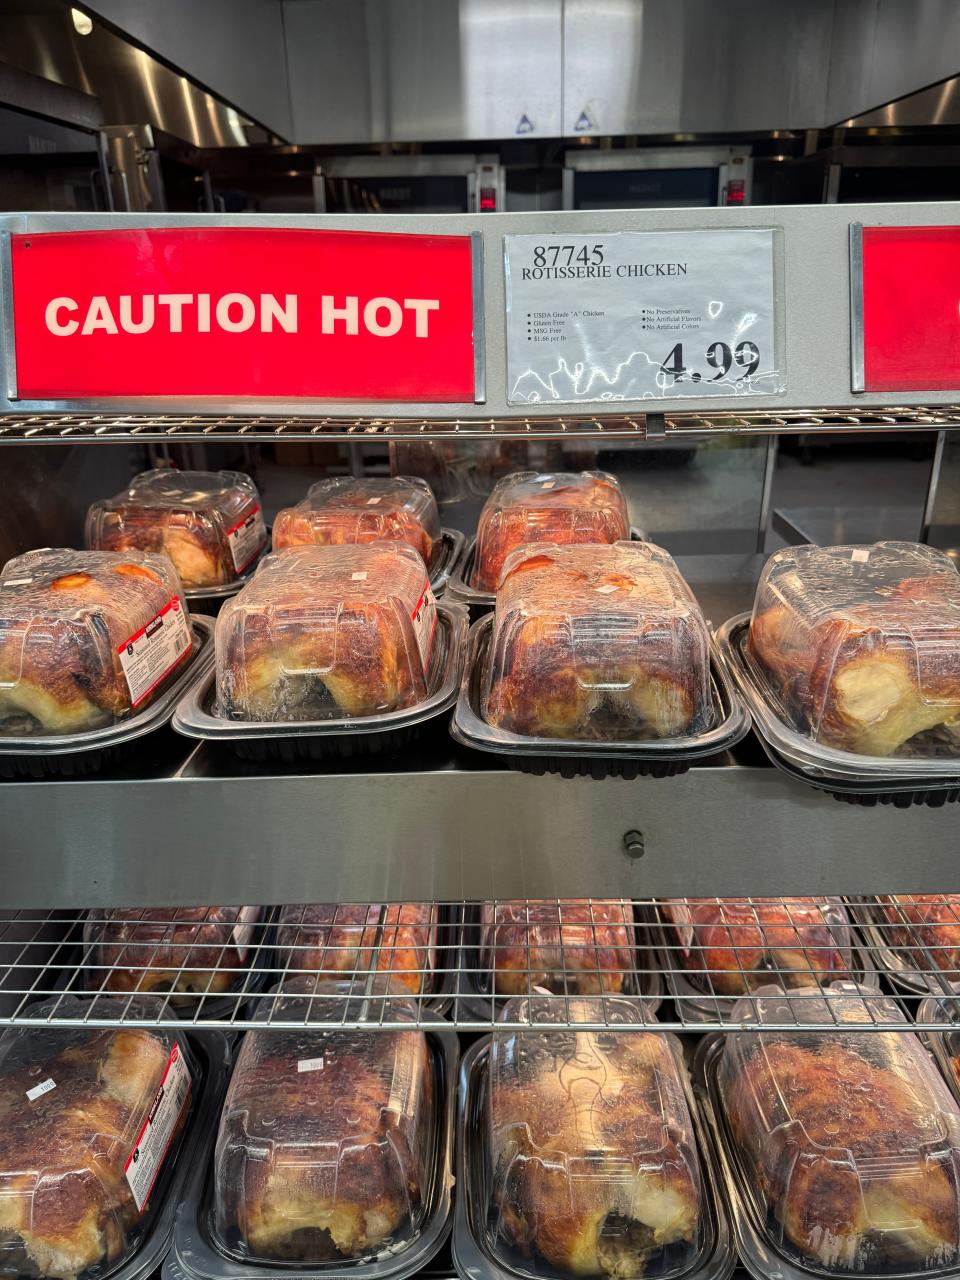 Costco rotisserie chicken display in store with $4.99 price tag above it